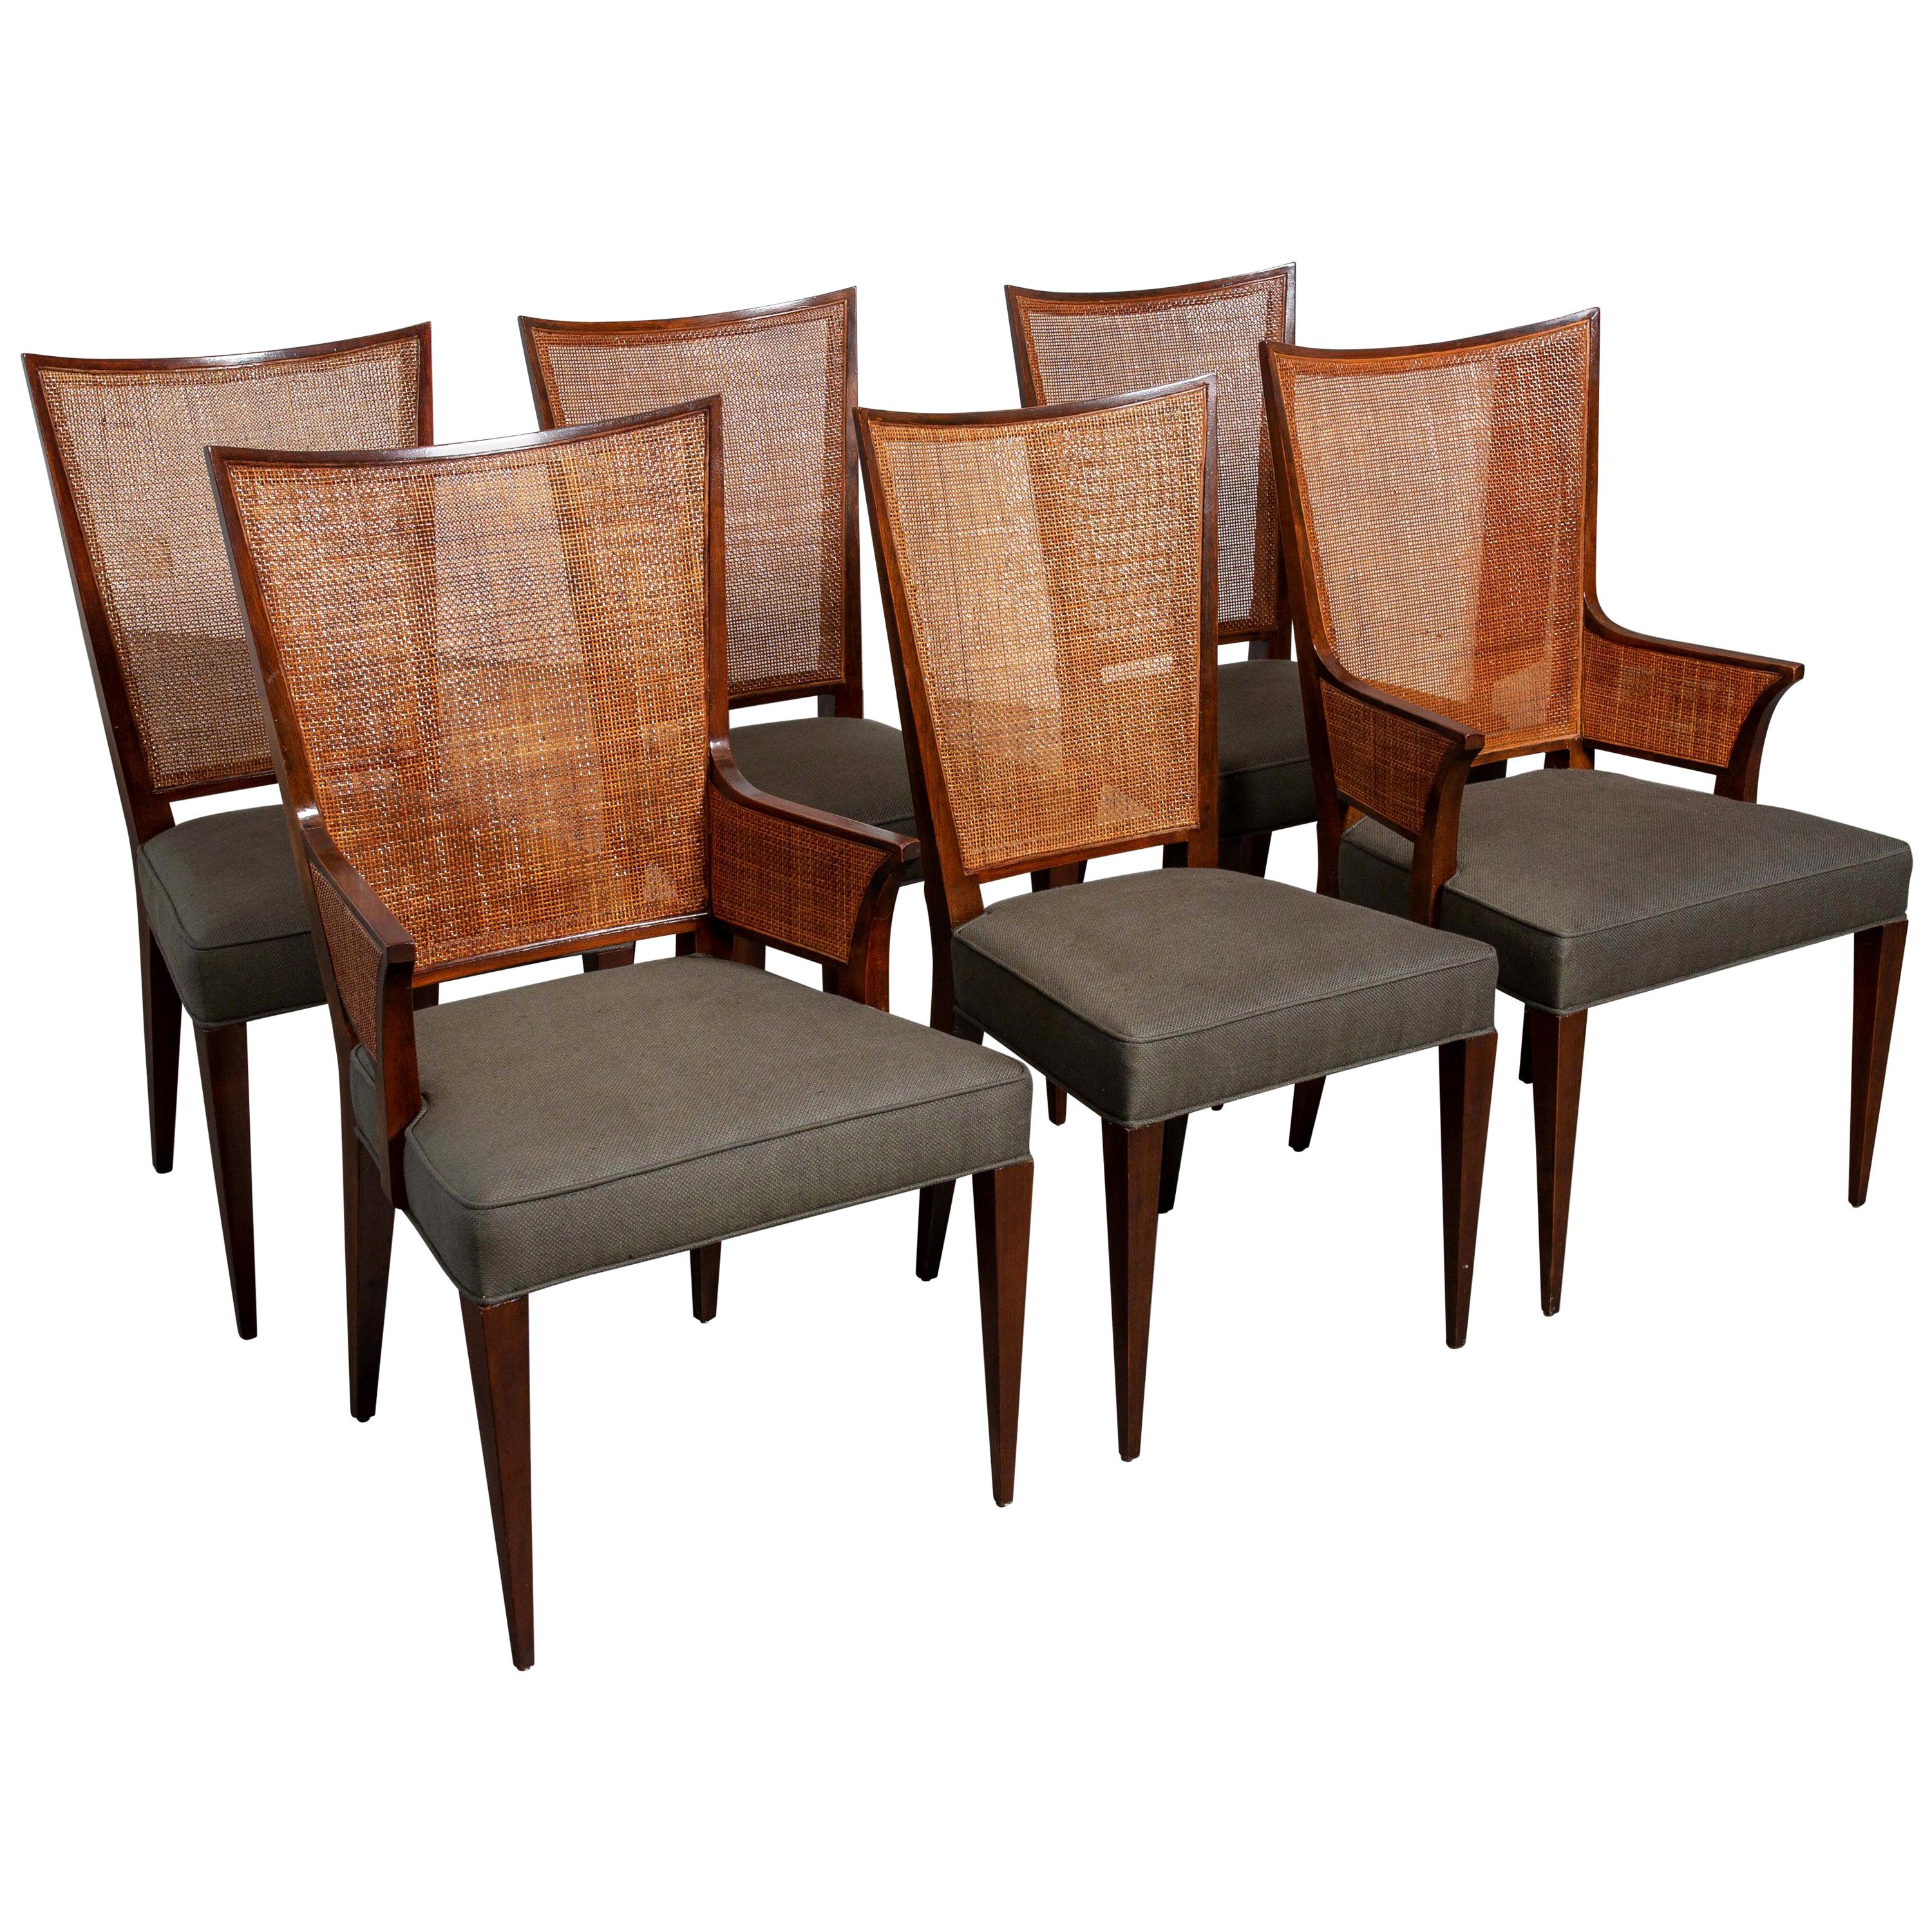 6 Baker Mid-Century Modern Cane Back Dining Chairs Attributed to Harvey Probber